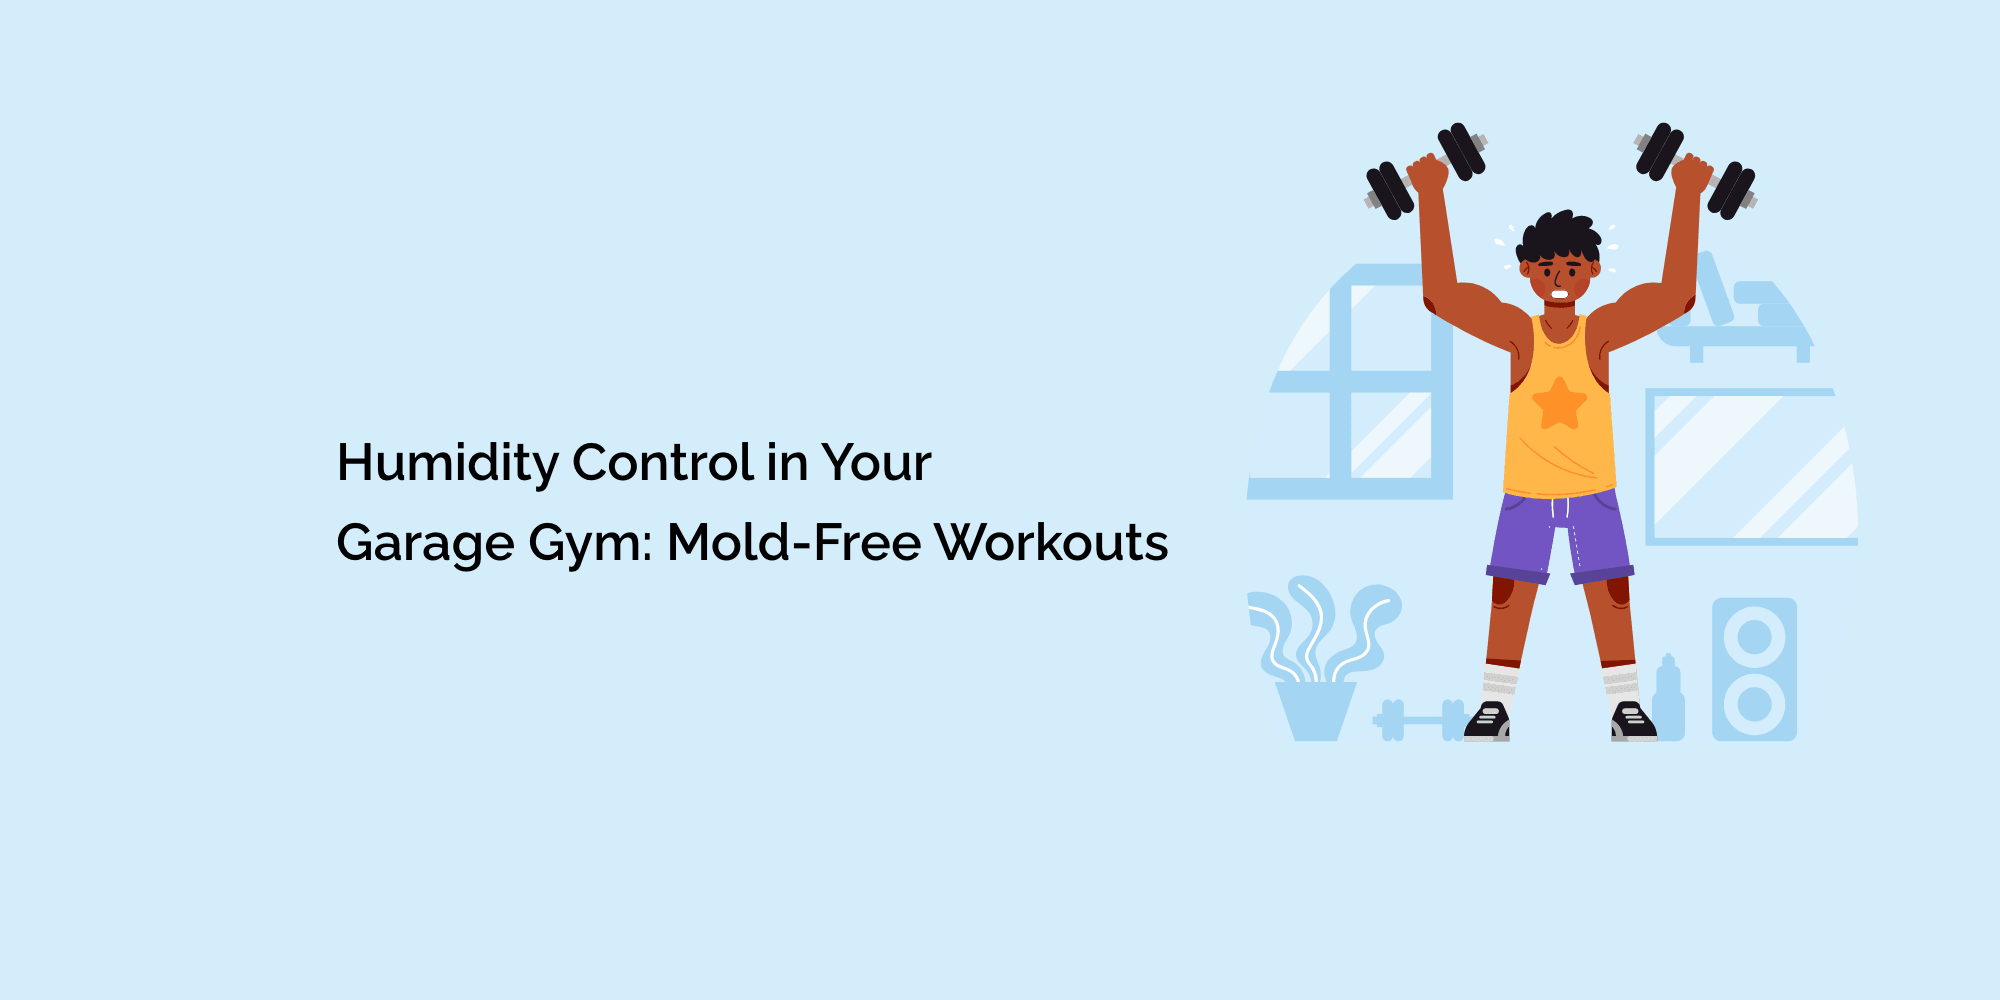 Humidity Control in Your Garage Gym: Mold-Free Workouts